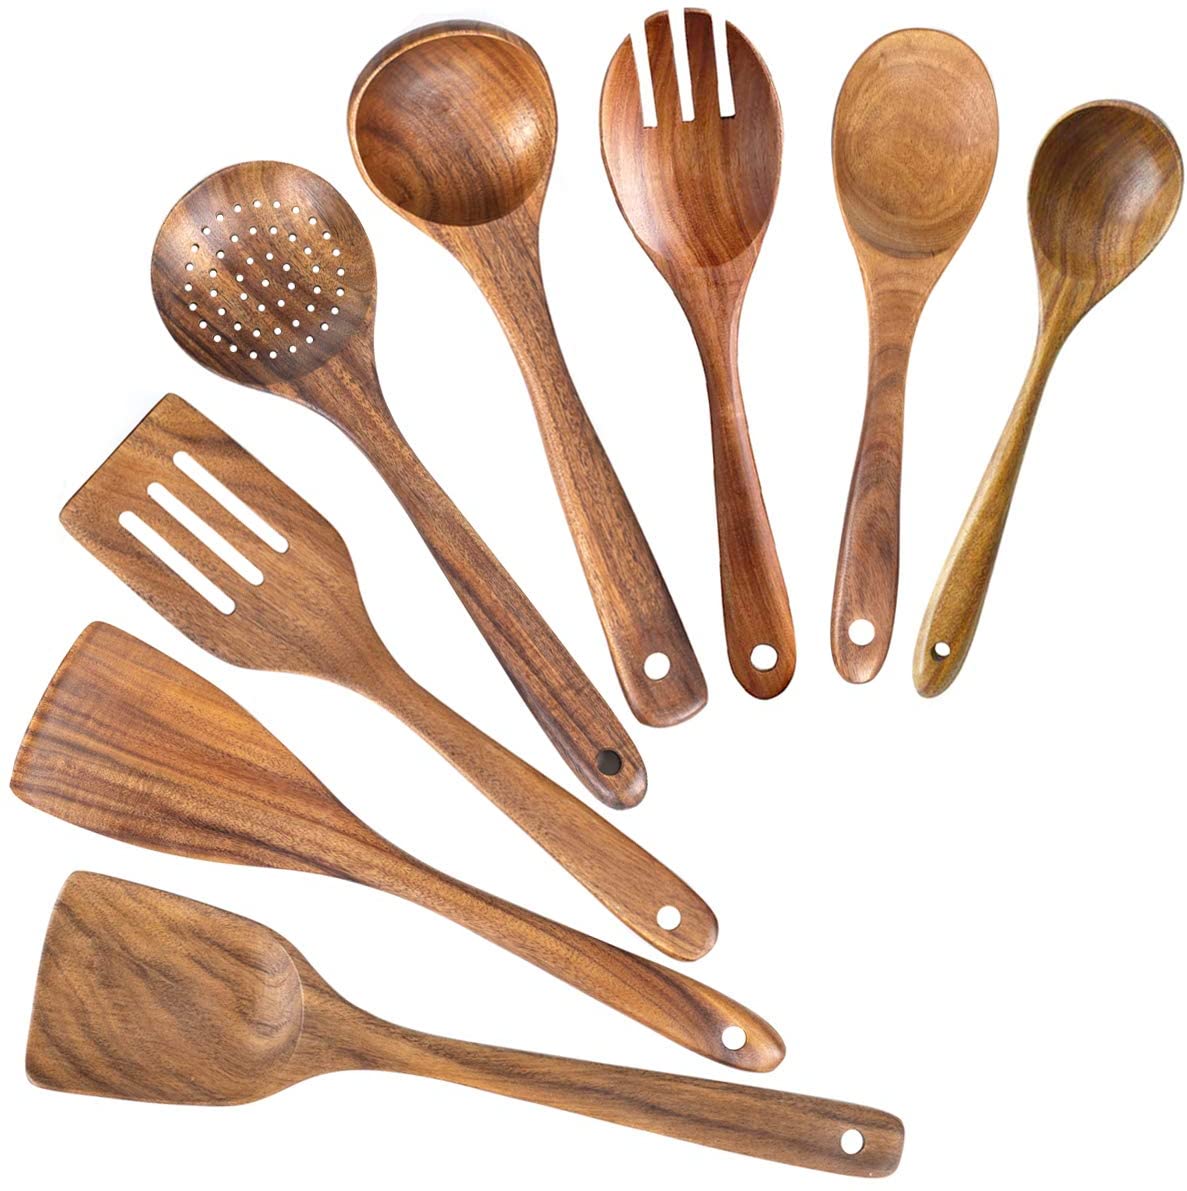 https://www.sewhomegrown.com/wp-content/uploads/2021/07/Wooden-Spoons-for-Cooking1.jpg